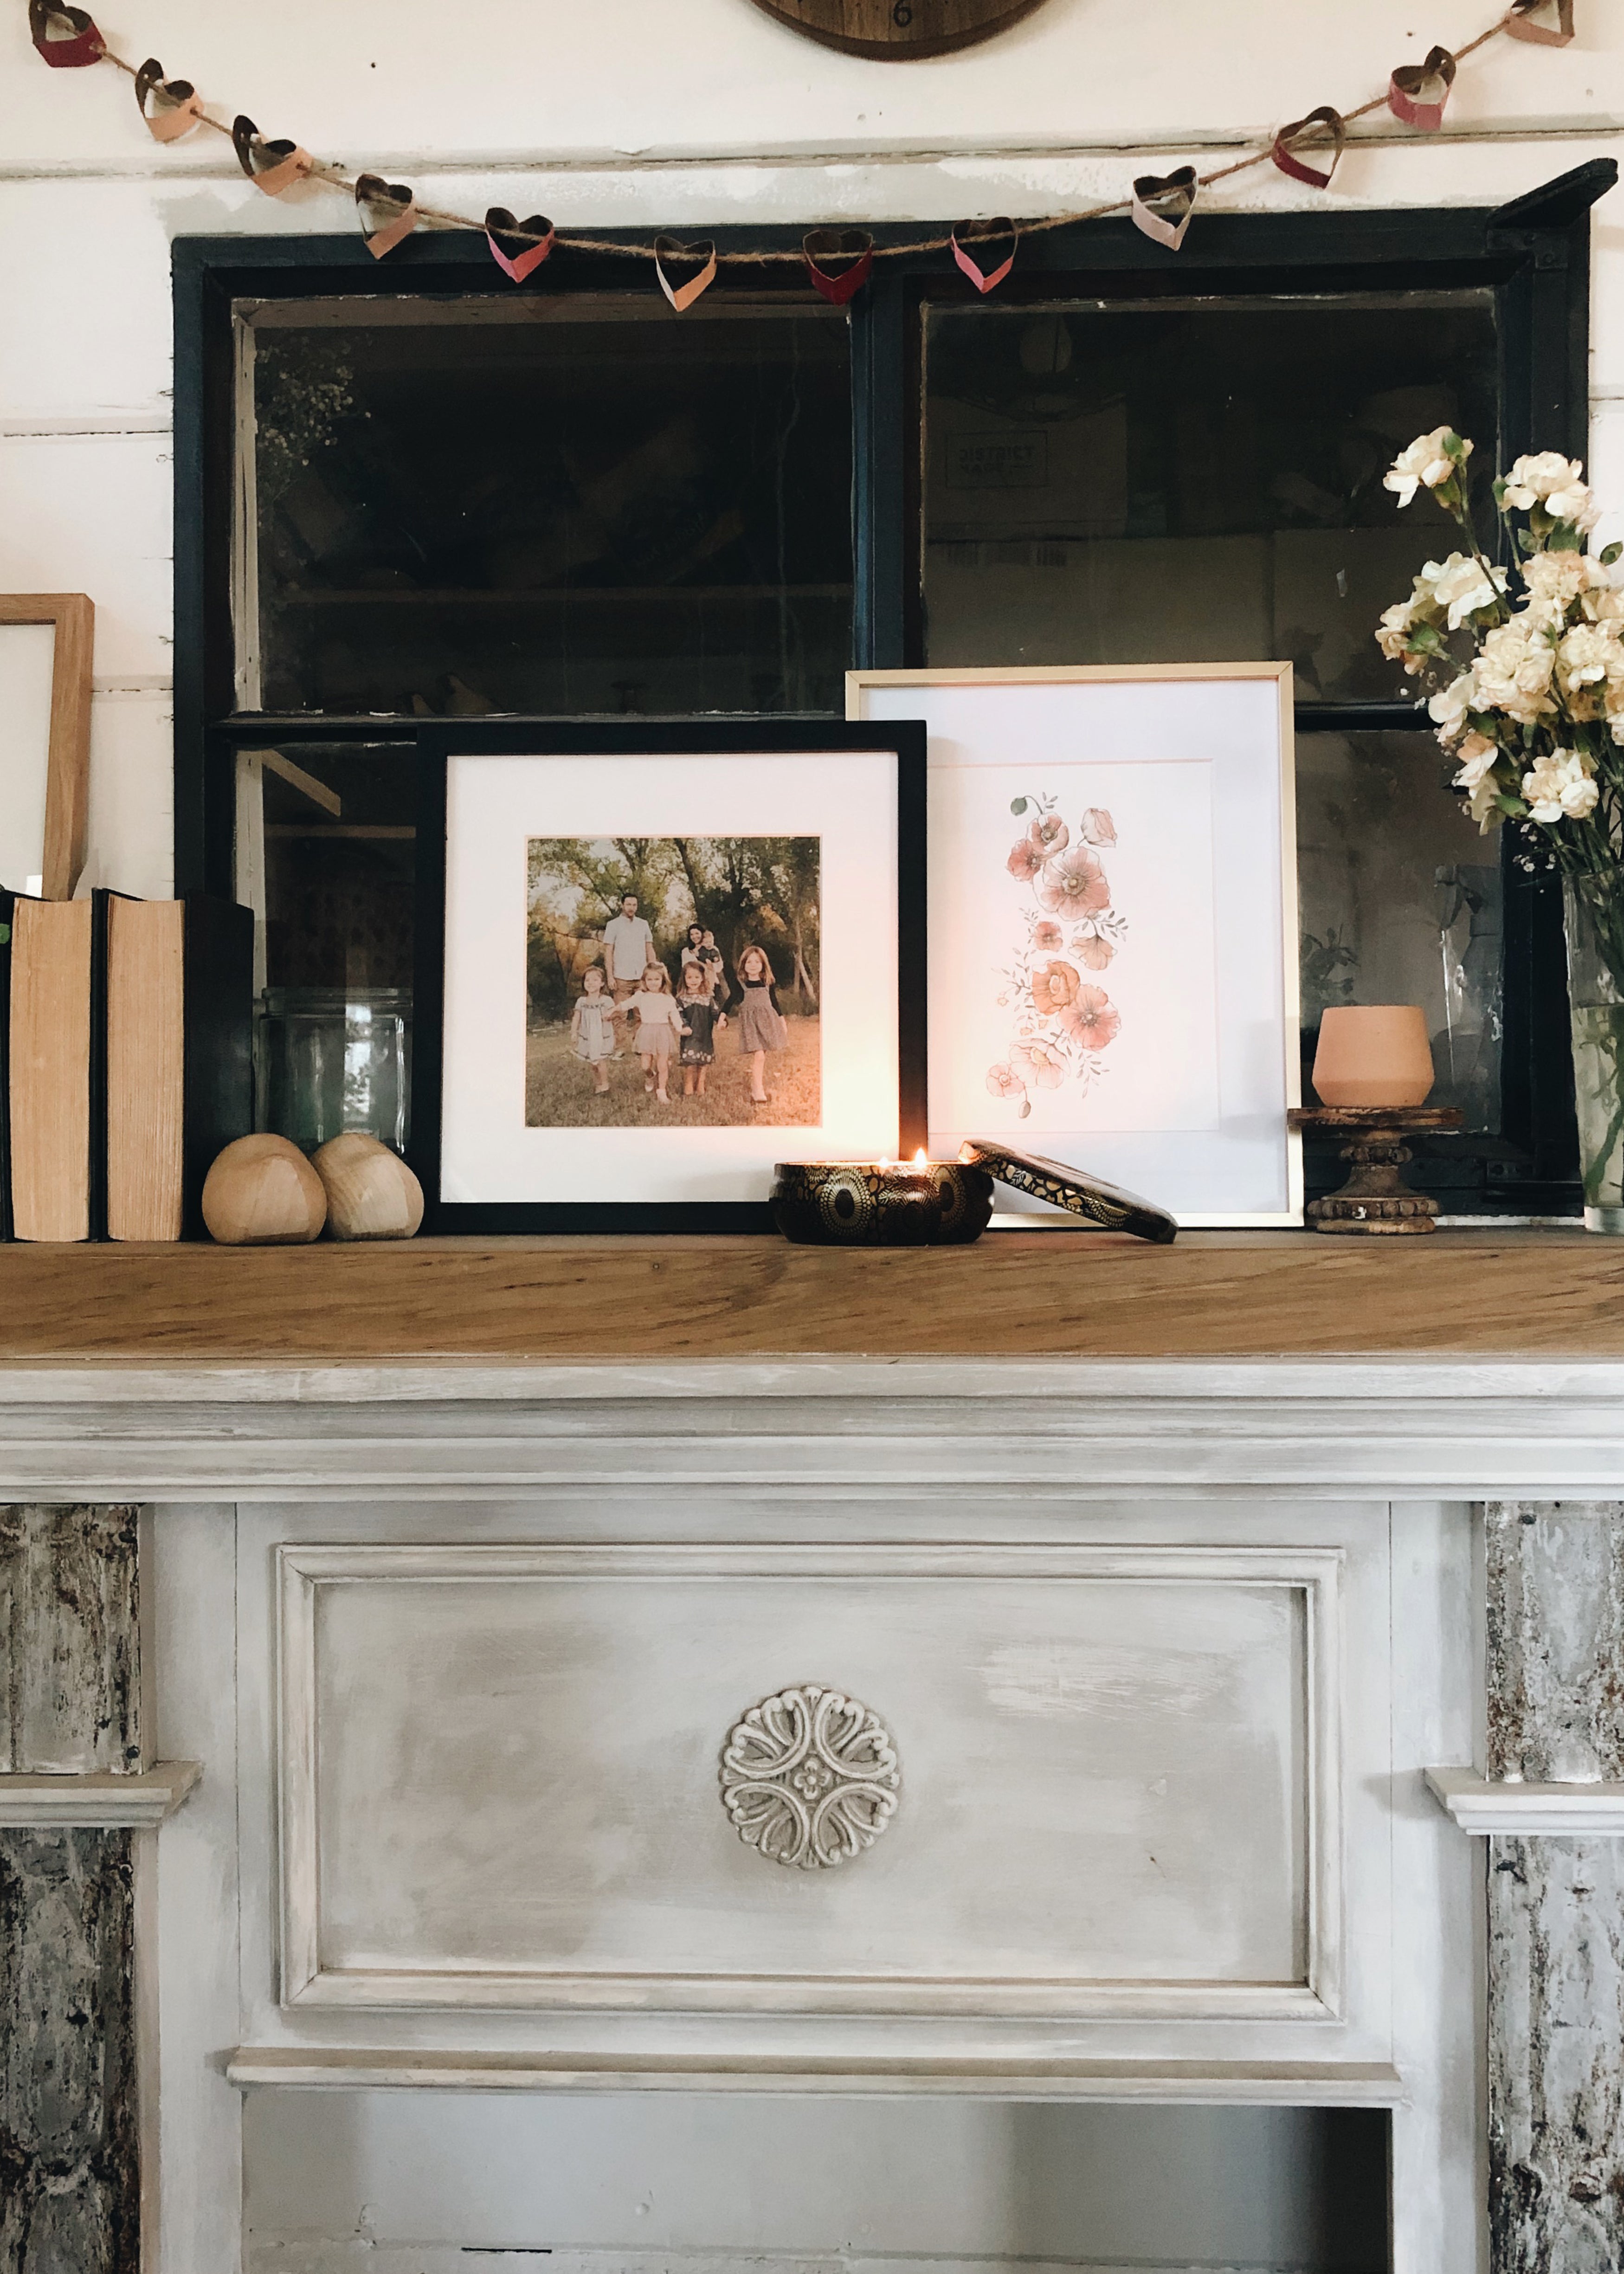 mantle with candles and family photo and framed painting of flowers